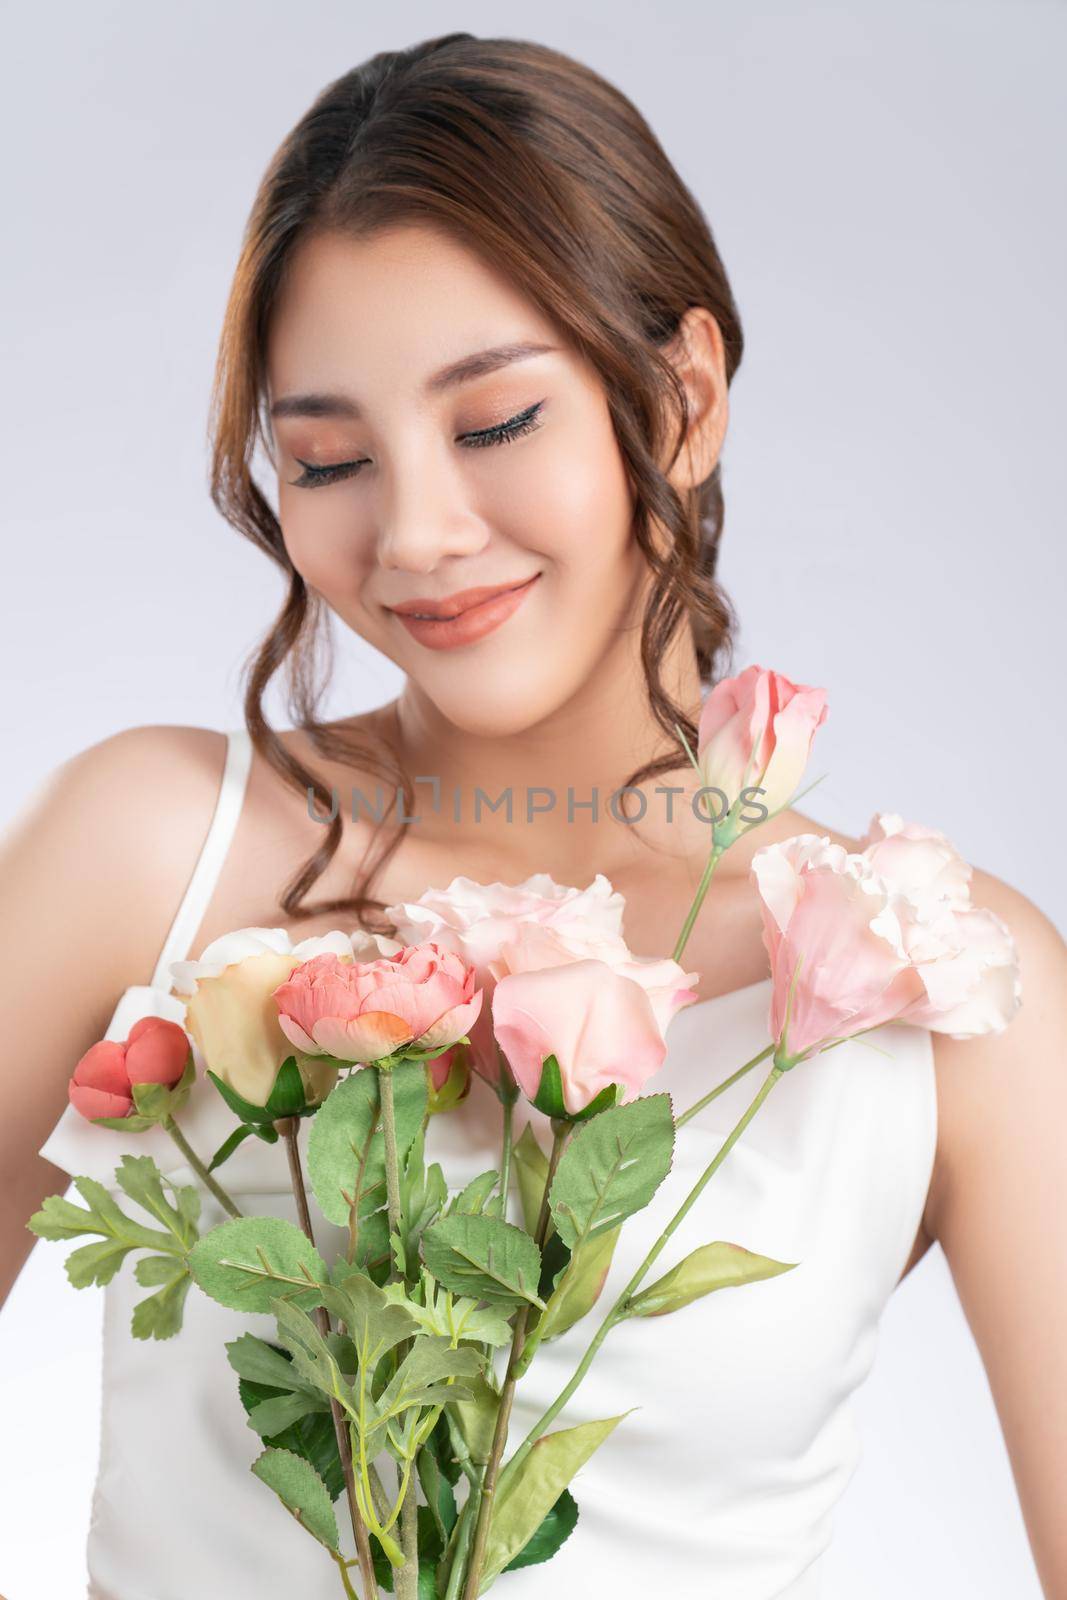 Closeup gorgeous female model with flawless fair skin and perfect makeup holding flowers bouquet. Woman receive flowers, white background.